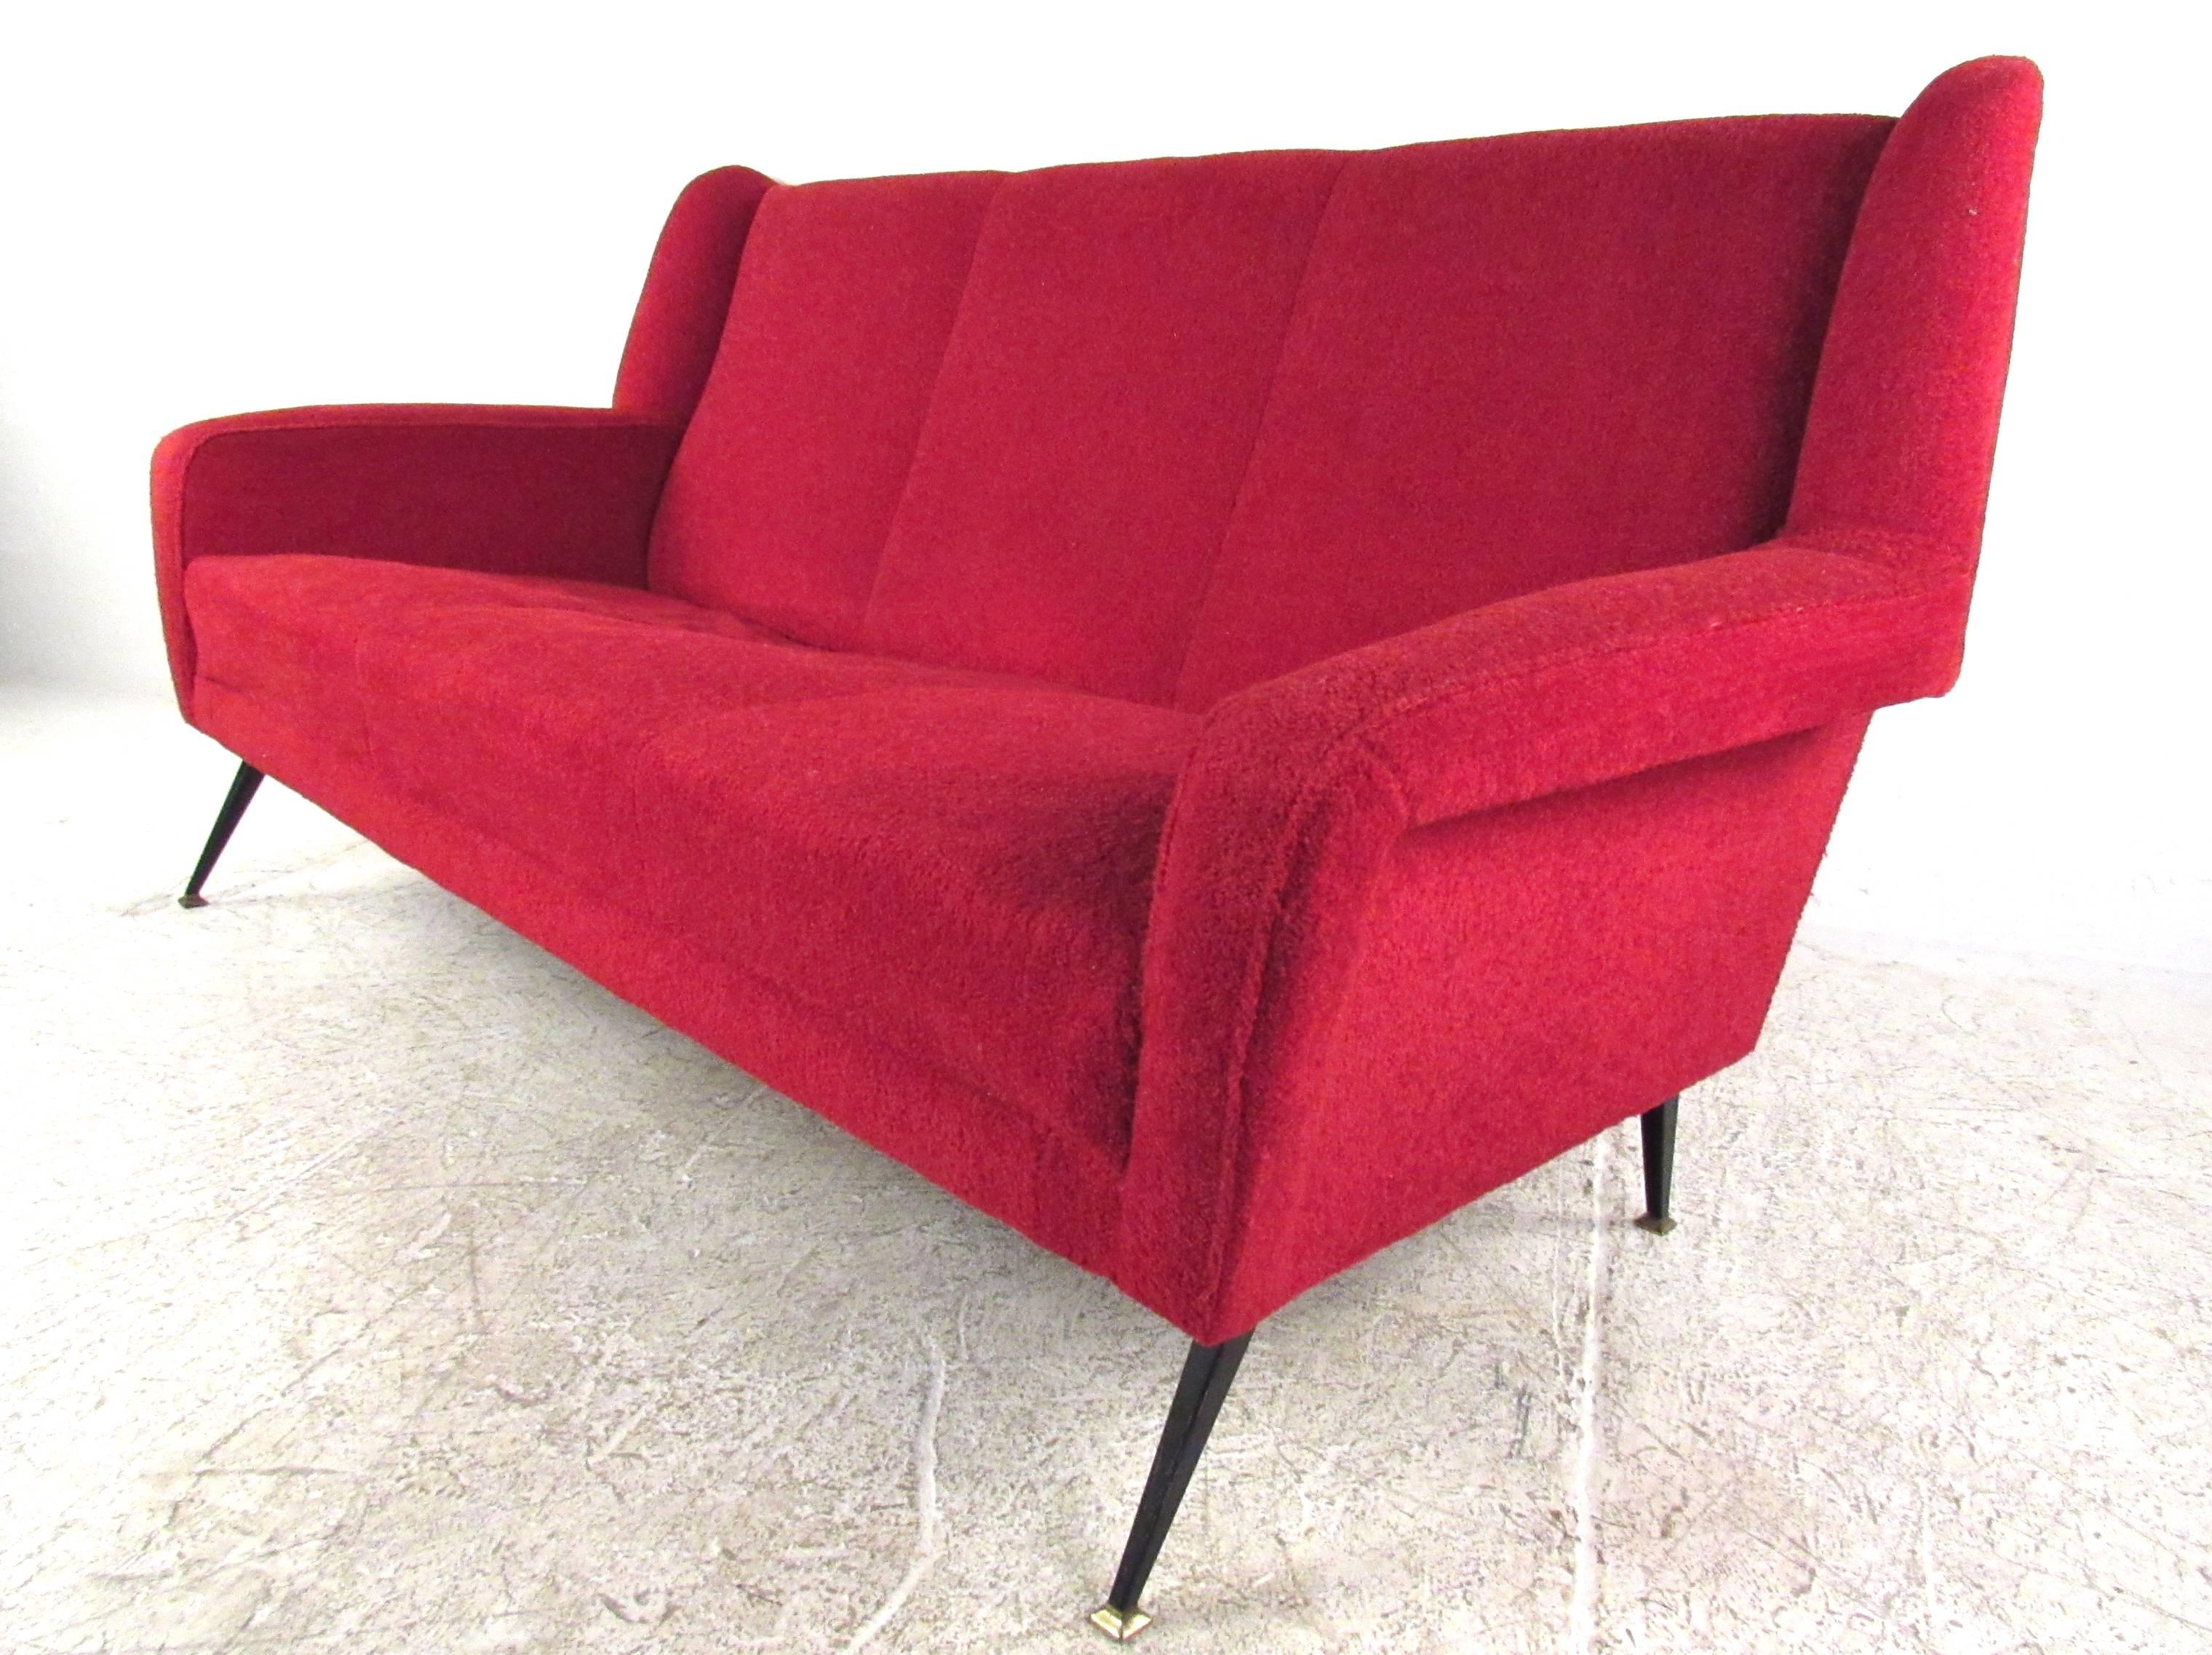 This vintage Italian sofa features the unique Mid-Century design style of Marco Zanuso. Sculpted upholstered frame makes for a comfortable seating option while enhancing the modern style of the piece. Black metal legs have brass finish feet. Unique